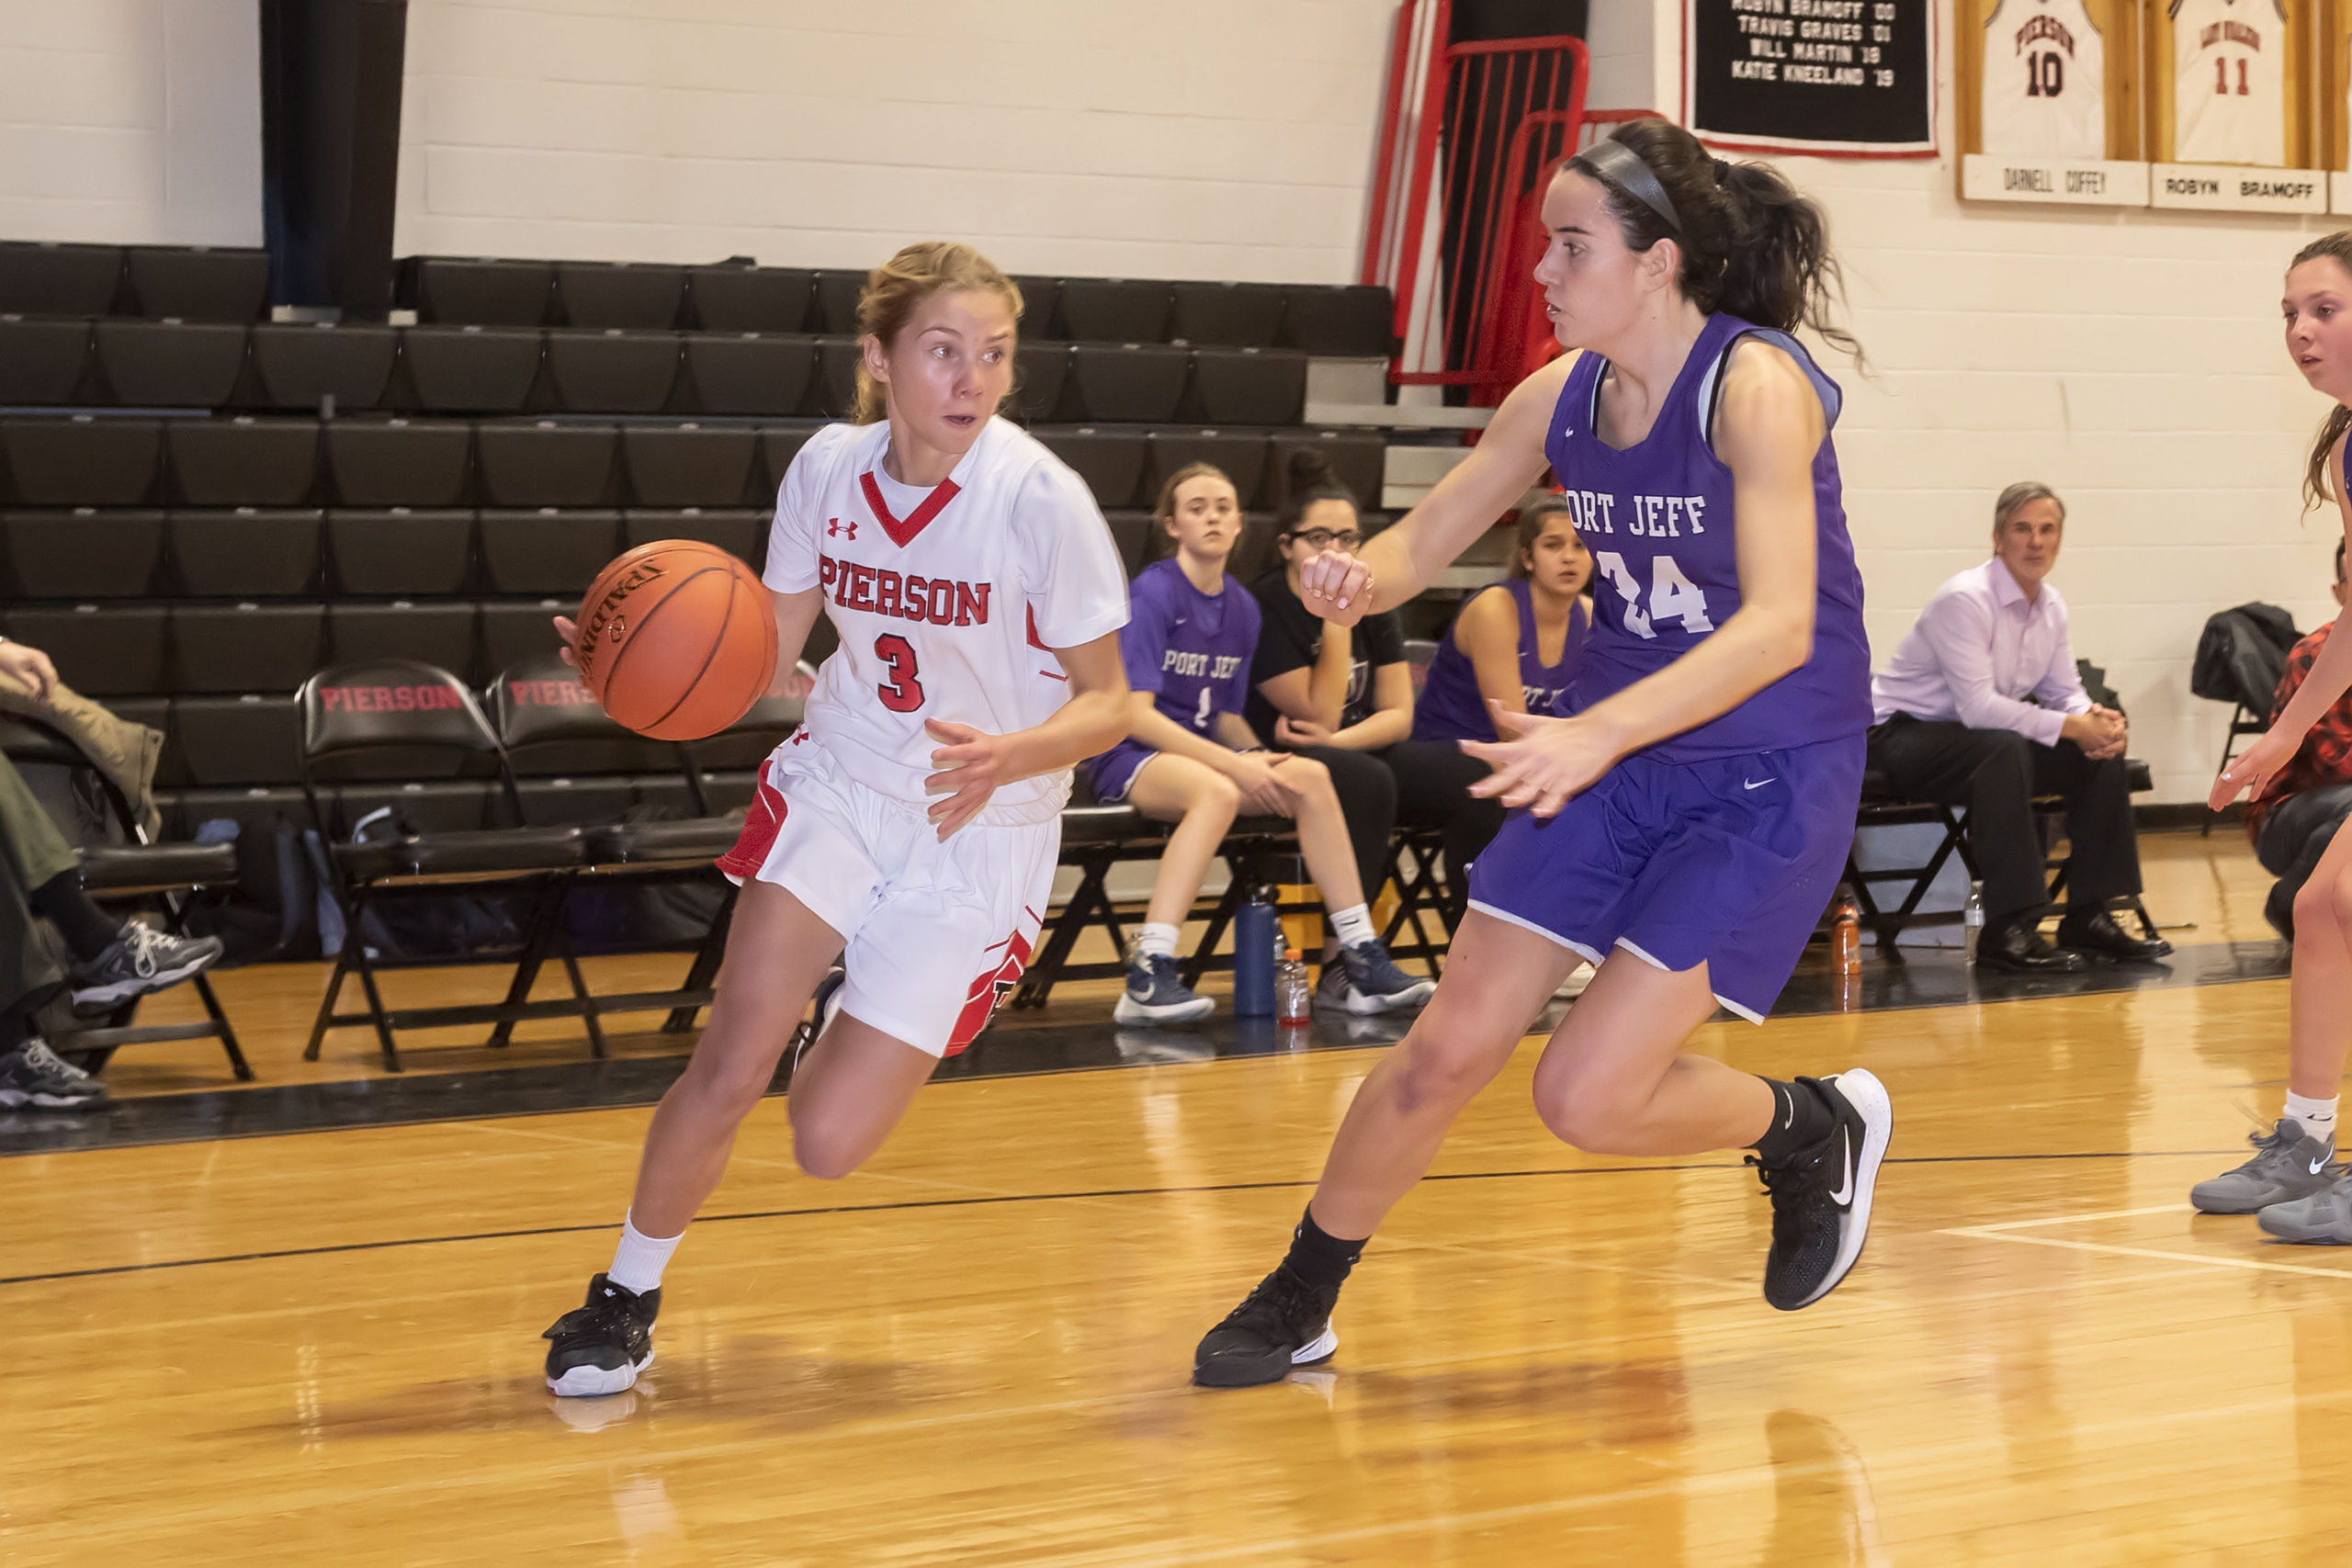 Pierson's Brooke Esposito takes on a Port Jeff defener one-on-one.